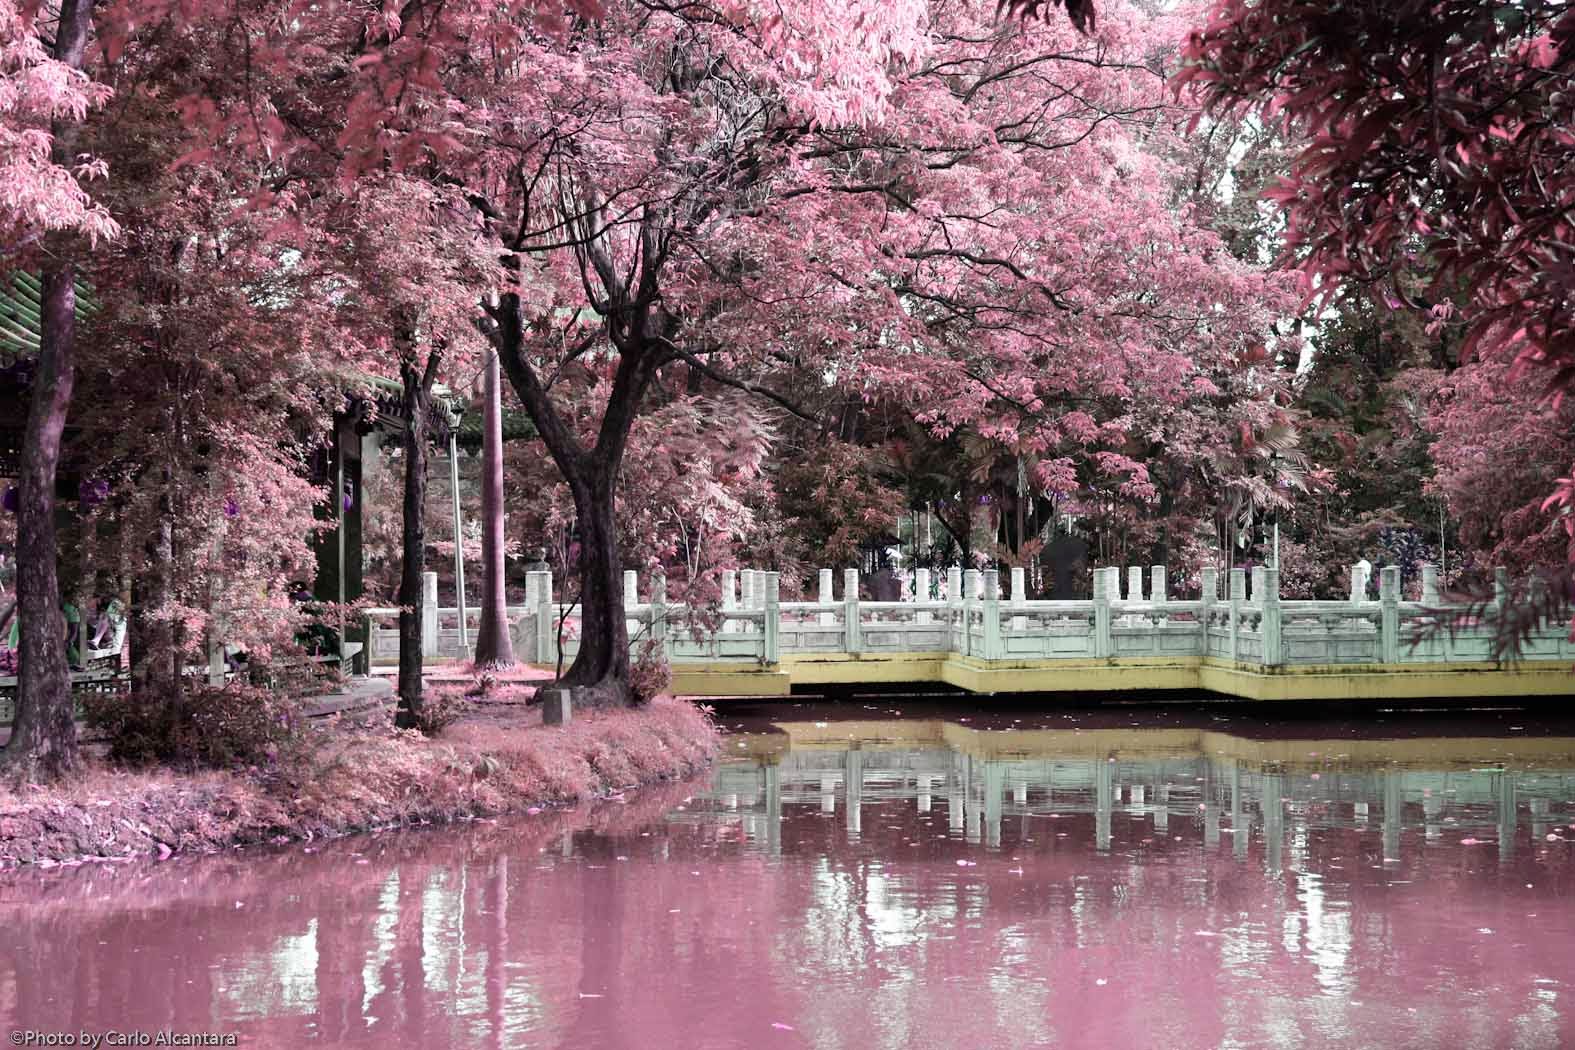 chinese wallpaper hd,nature,tree,spring,natural landscape,pink